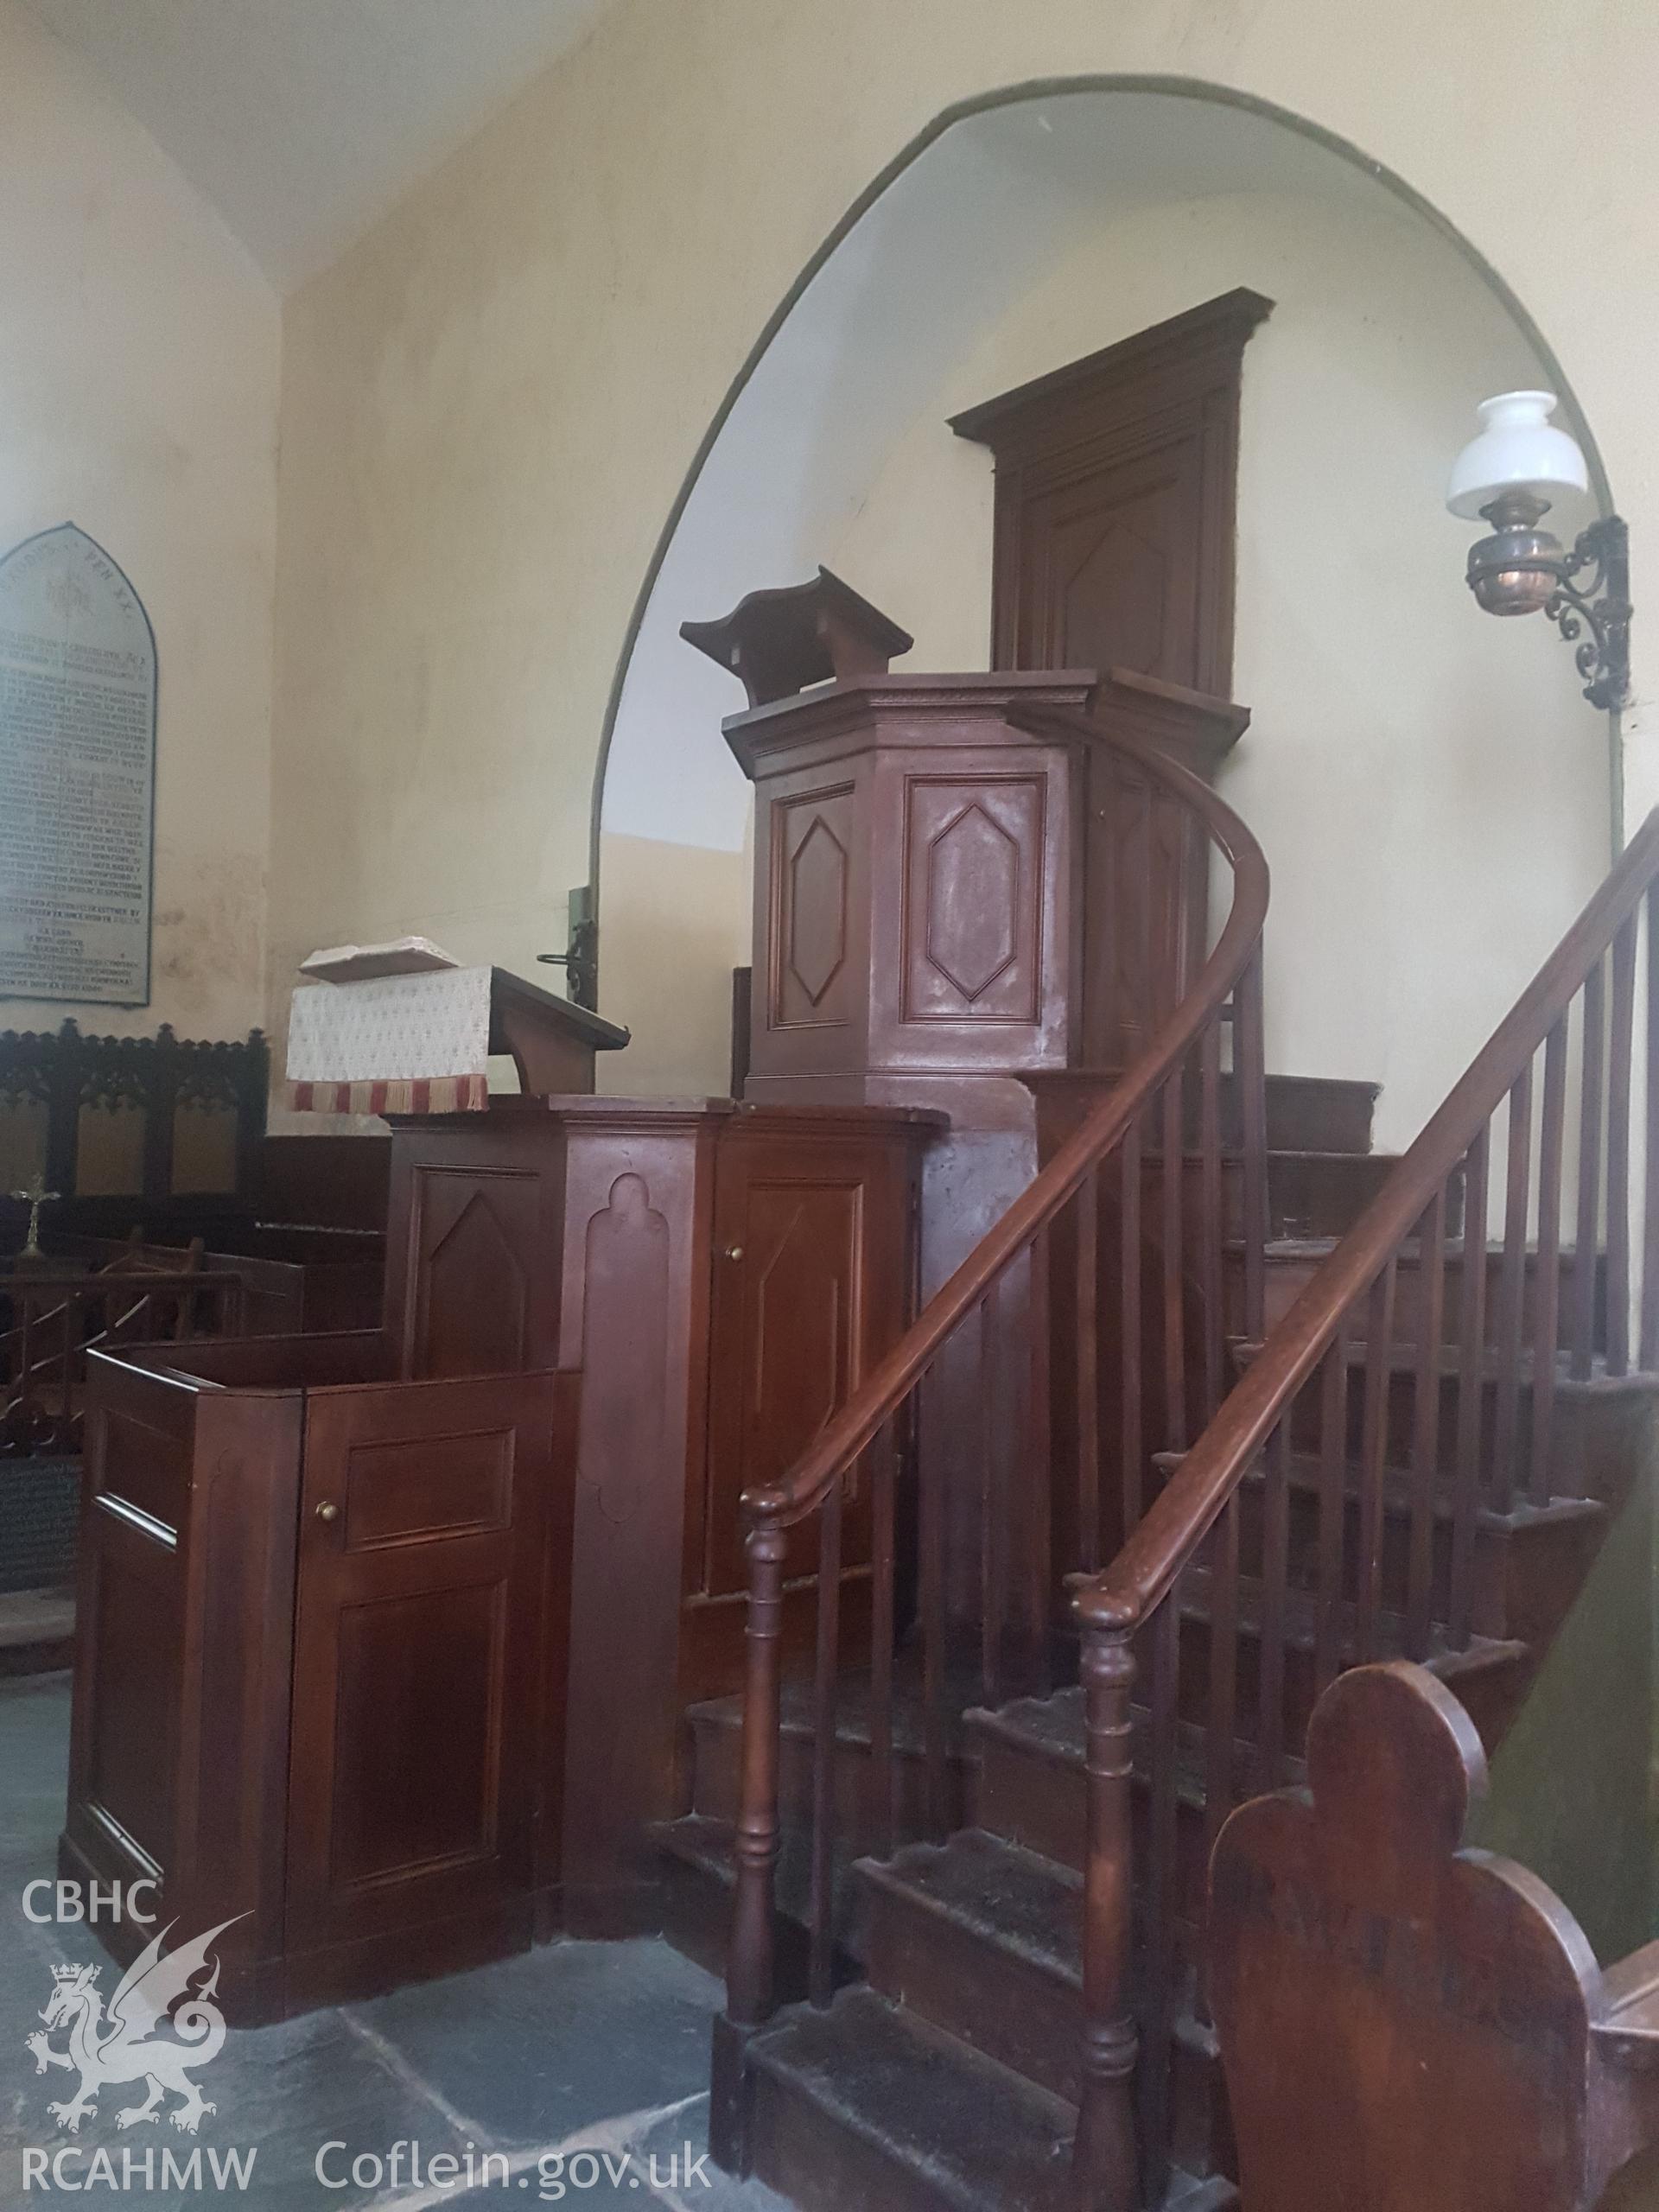 Three-decker pulpit, St Cynhaiarn church. Photographed by Helen Rowe of RCAHMW on 10th October 2020.